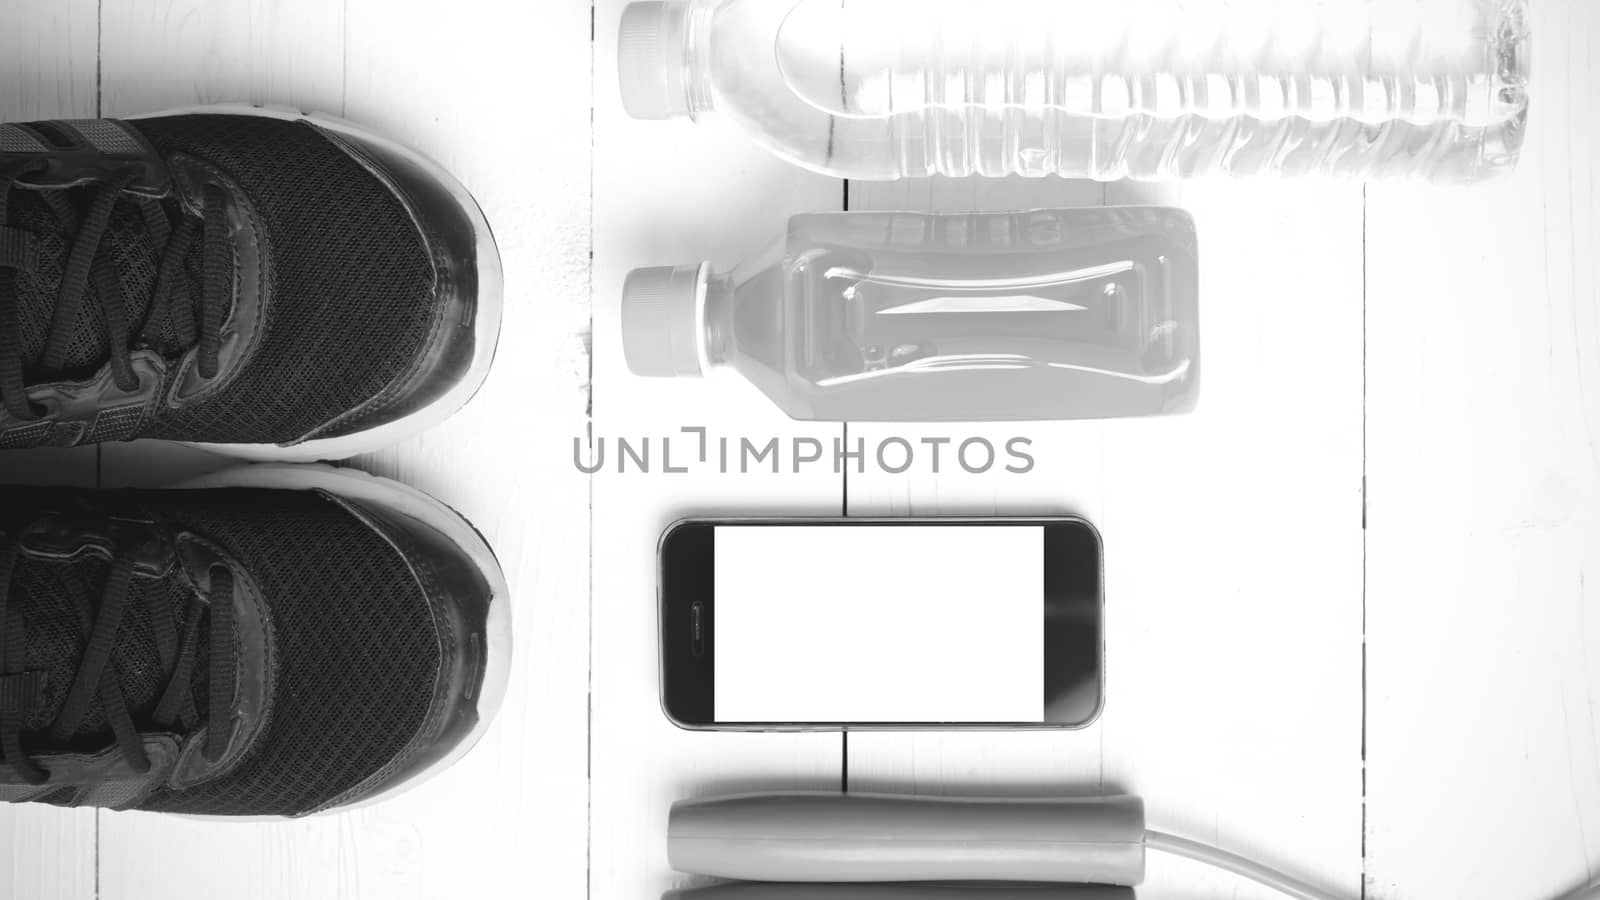 fitness equipment : running shoes,jumping rope,water,juice and phone on white wood background black and white color